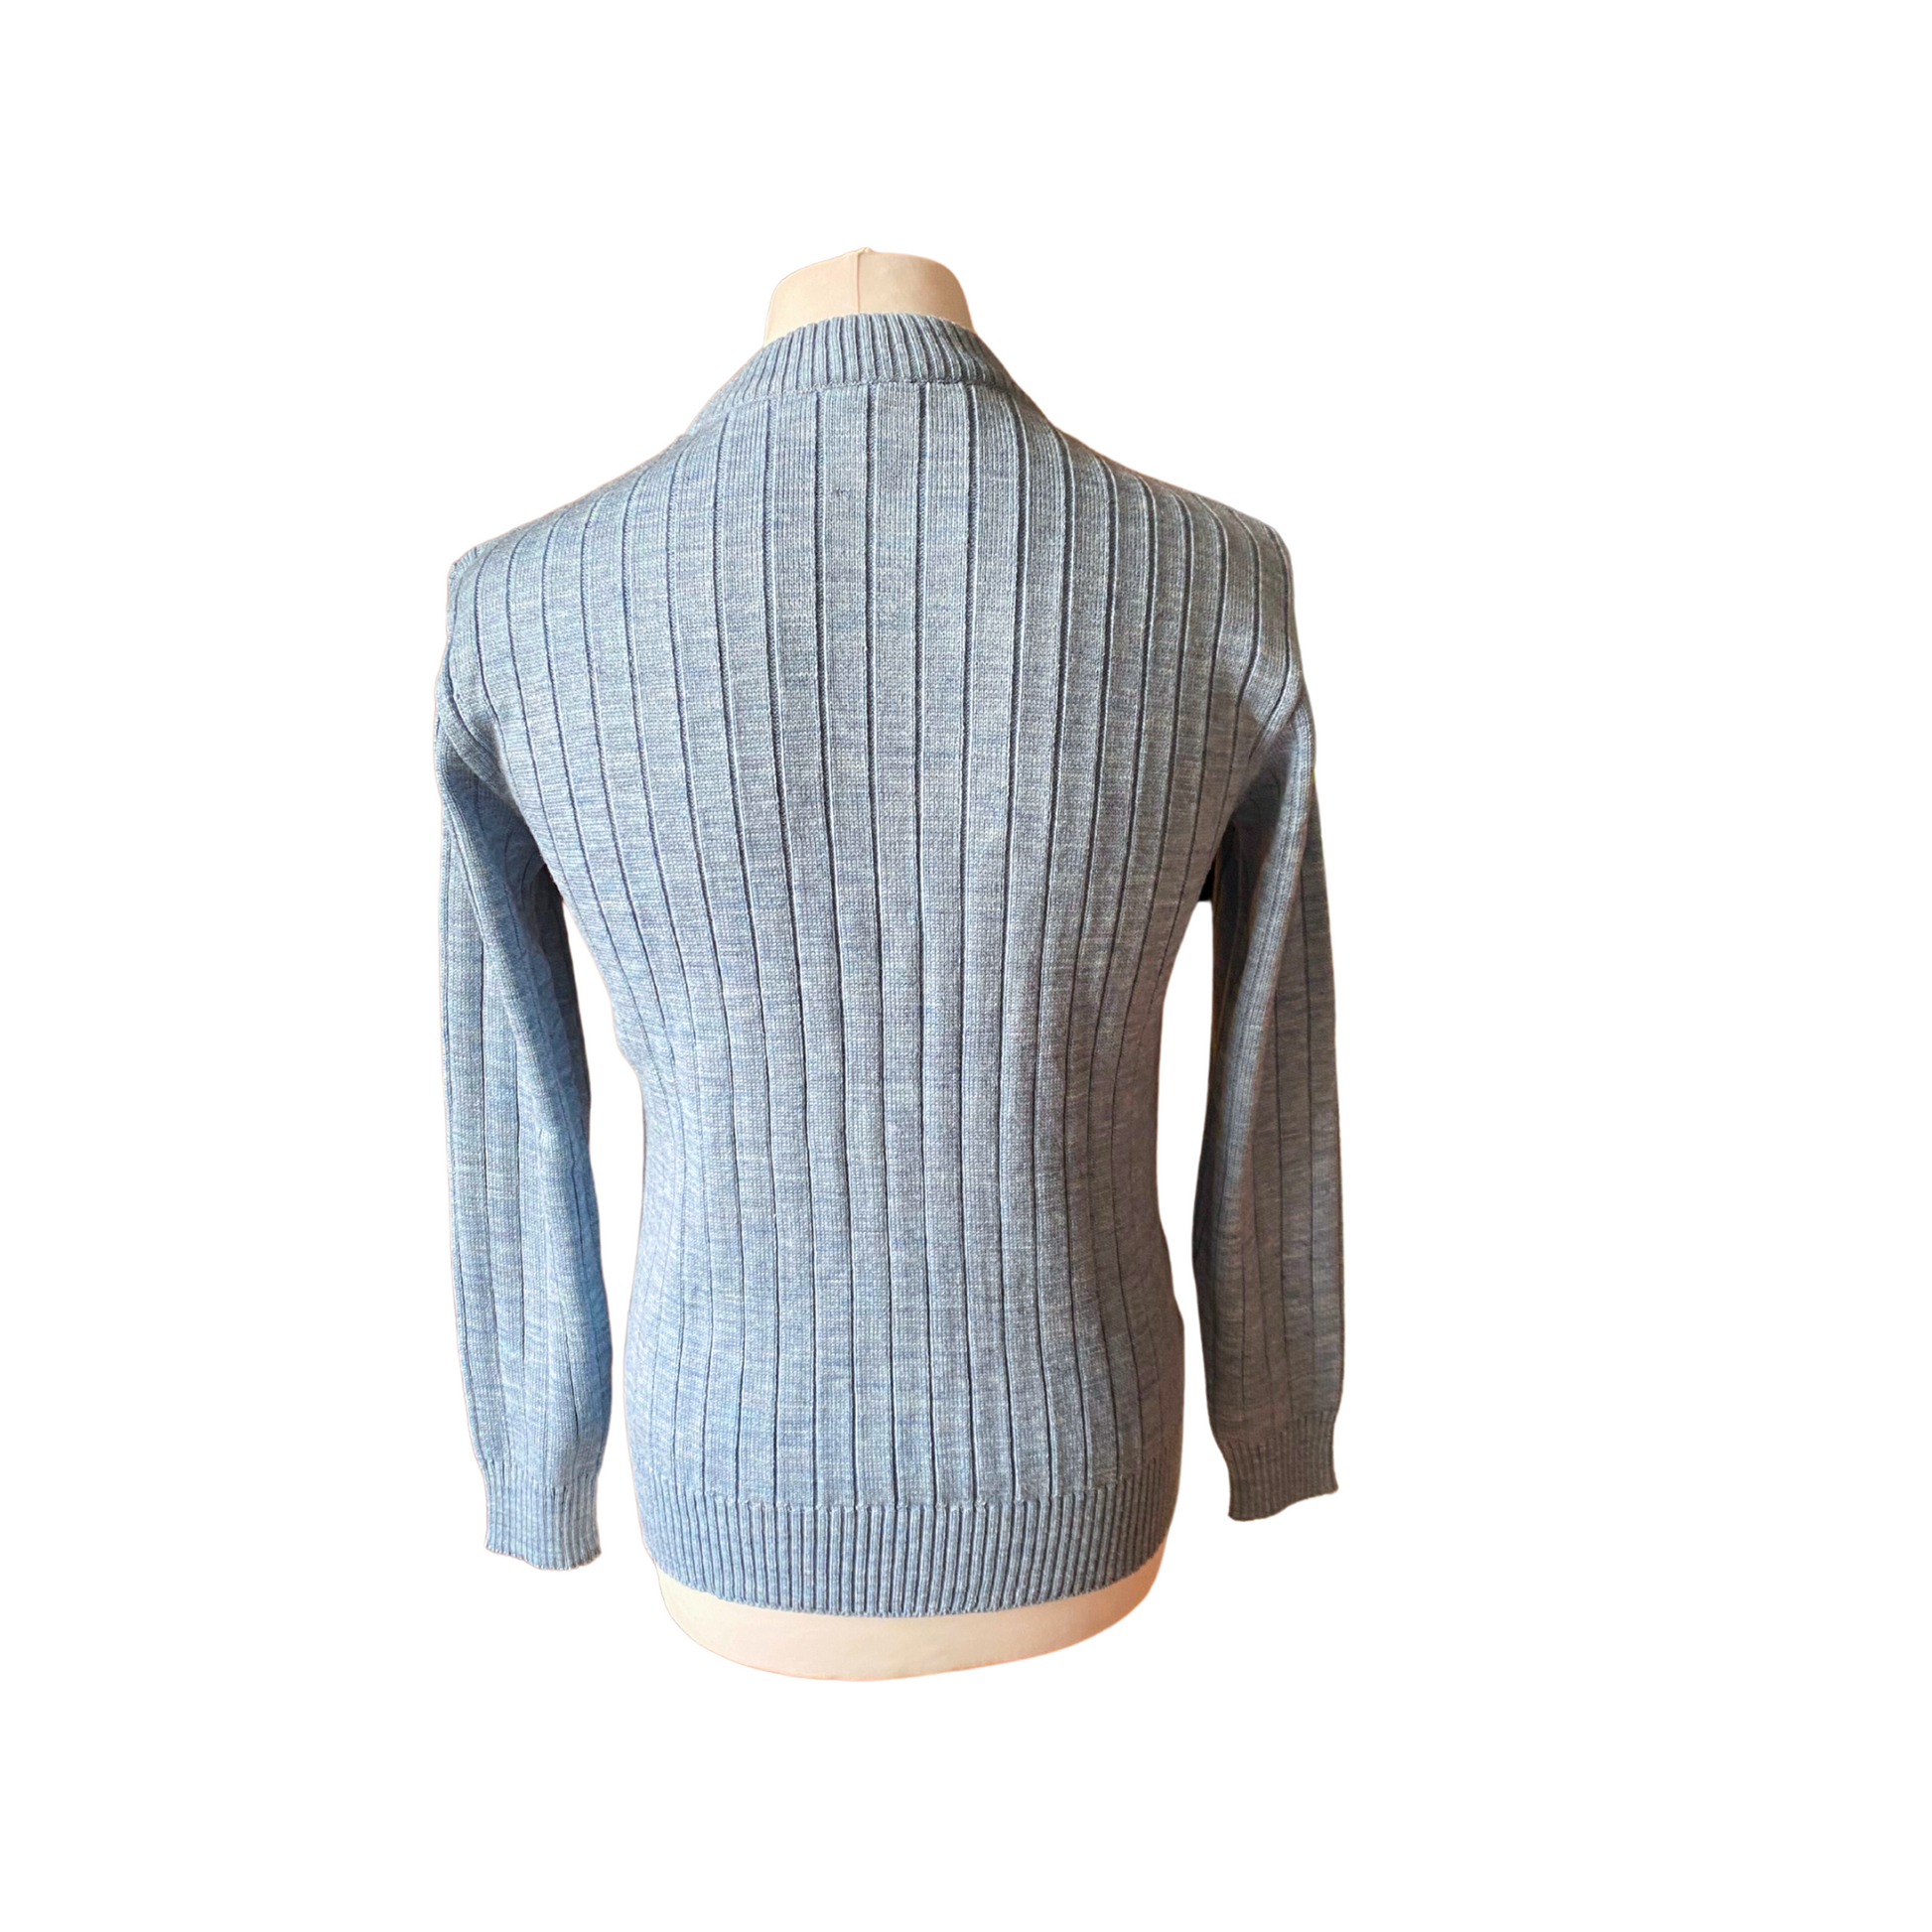 Classic crewneck sweater in blue marl - a must-have for any wardrobe